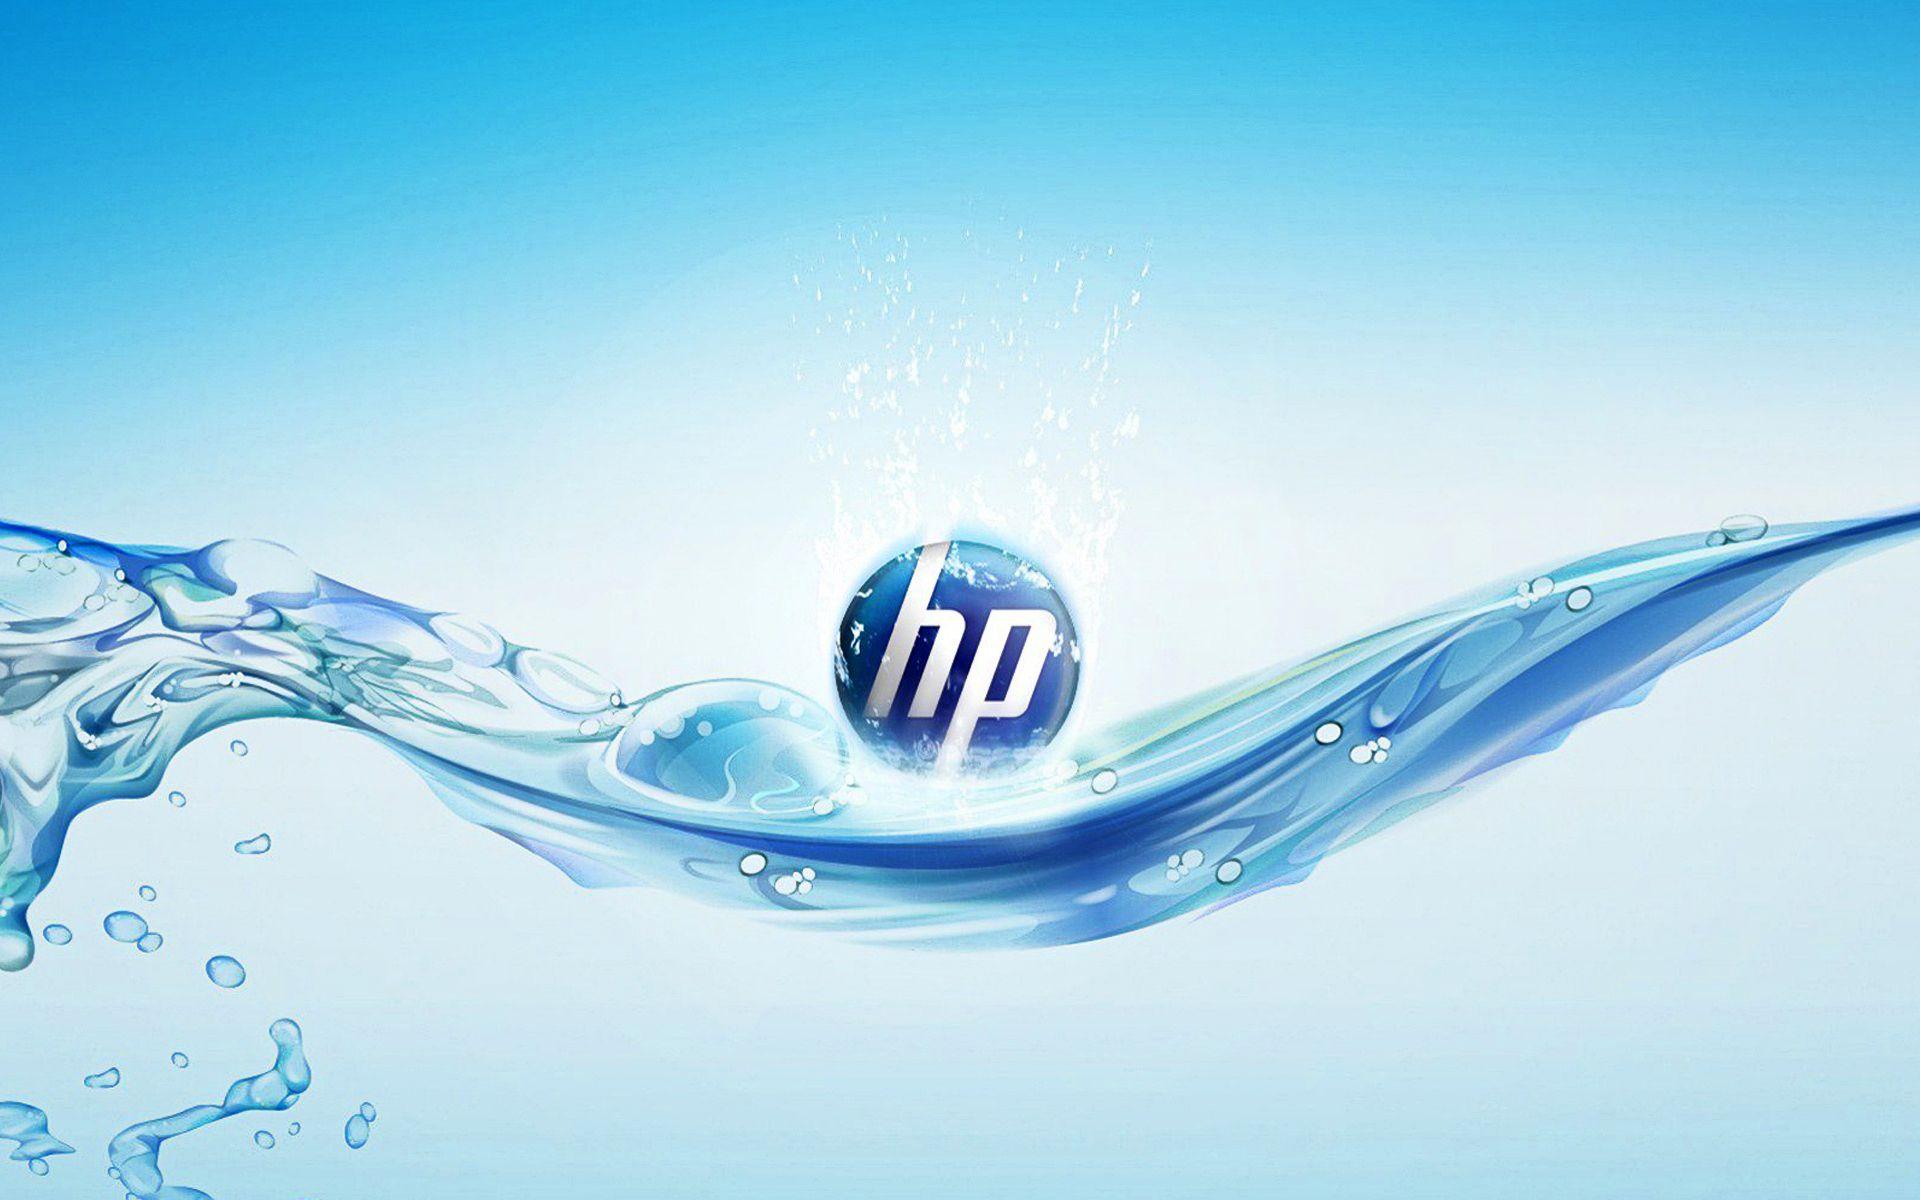 Cute HP Logo - Logo Cool and Free Wallpaper for Download at WallpaperLepi.com